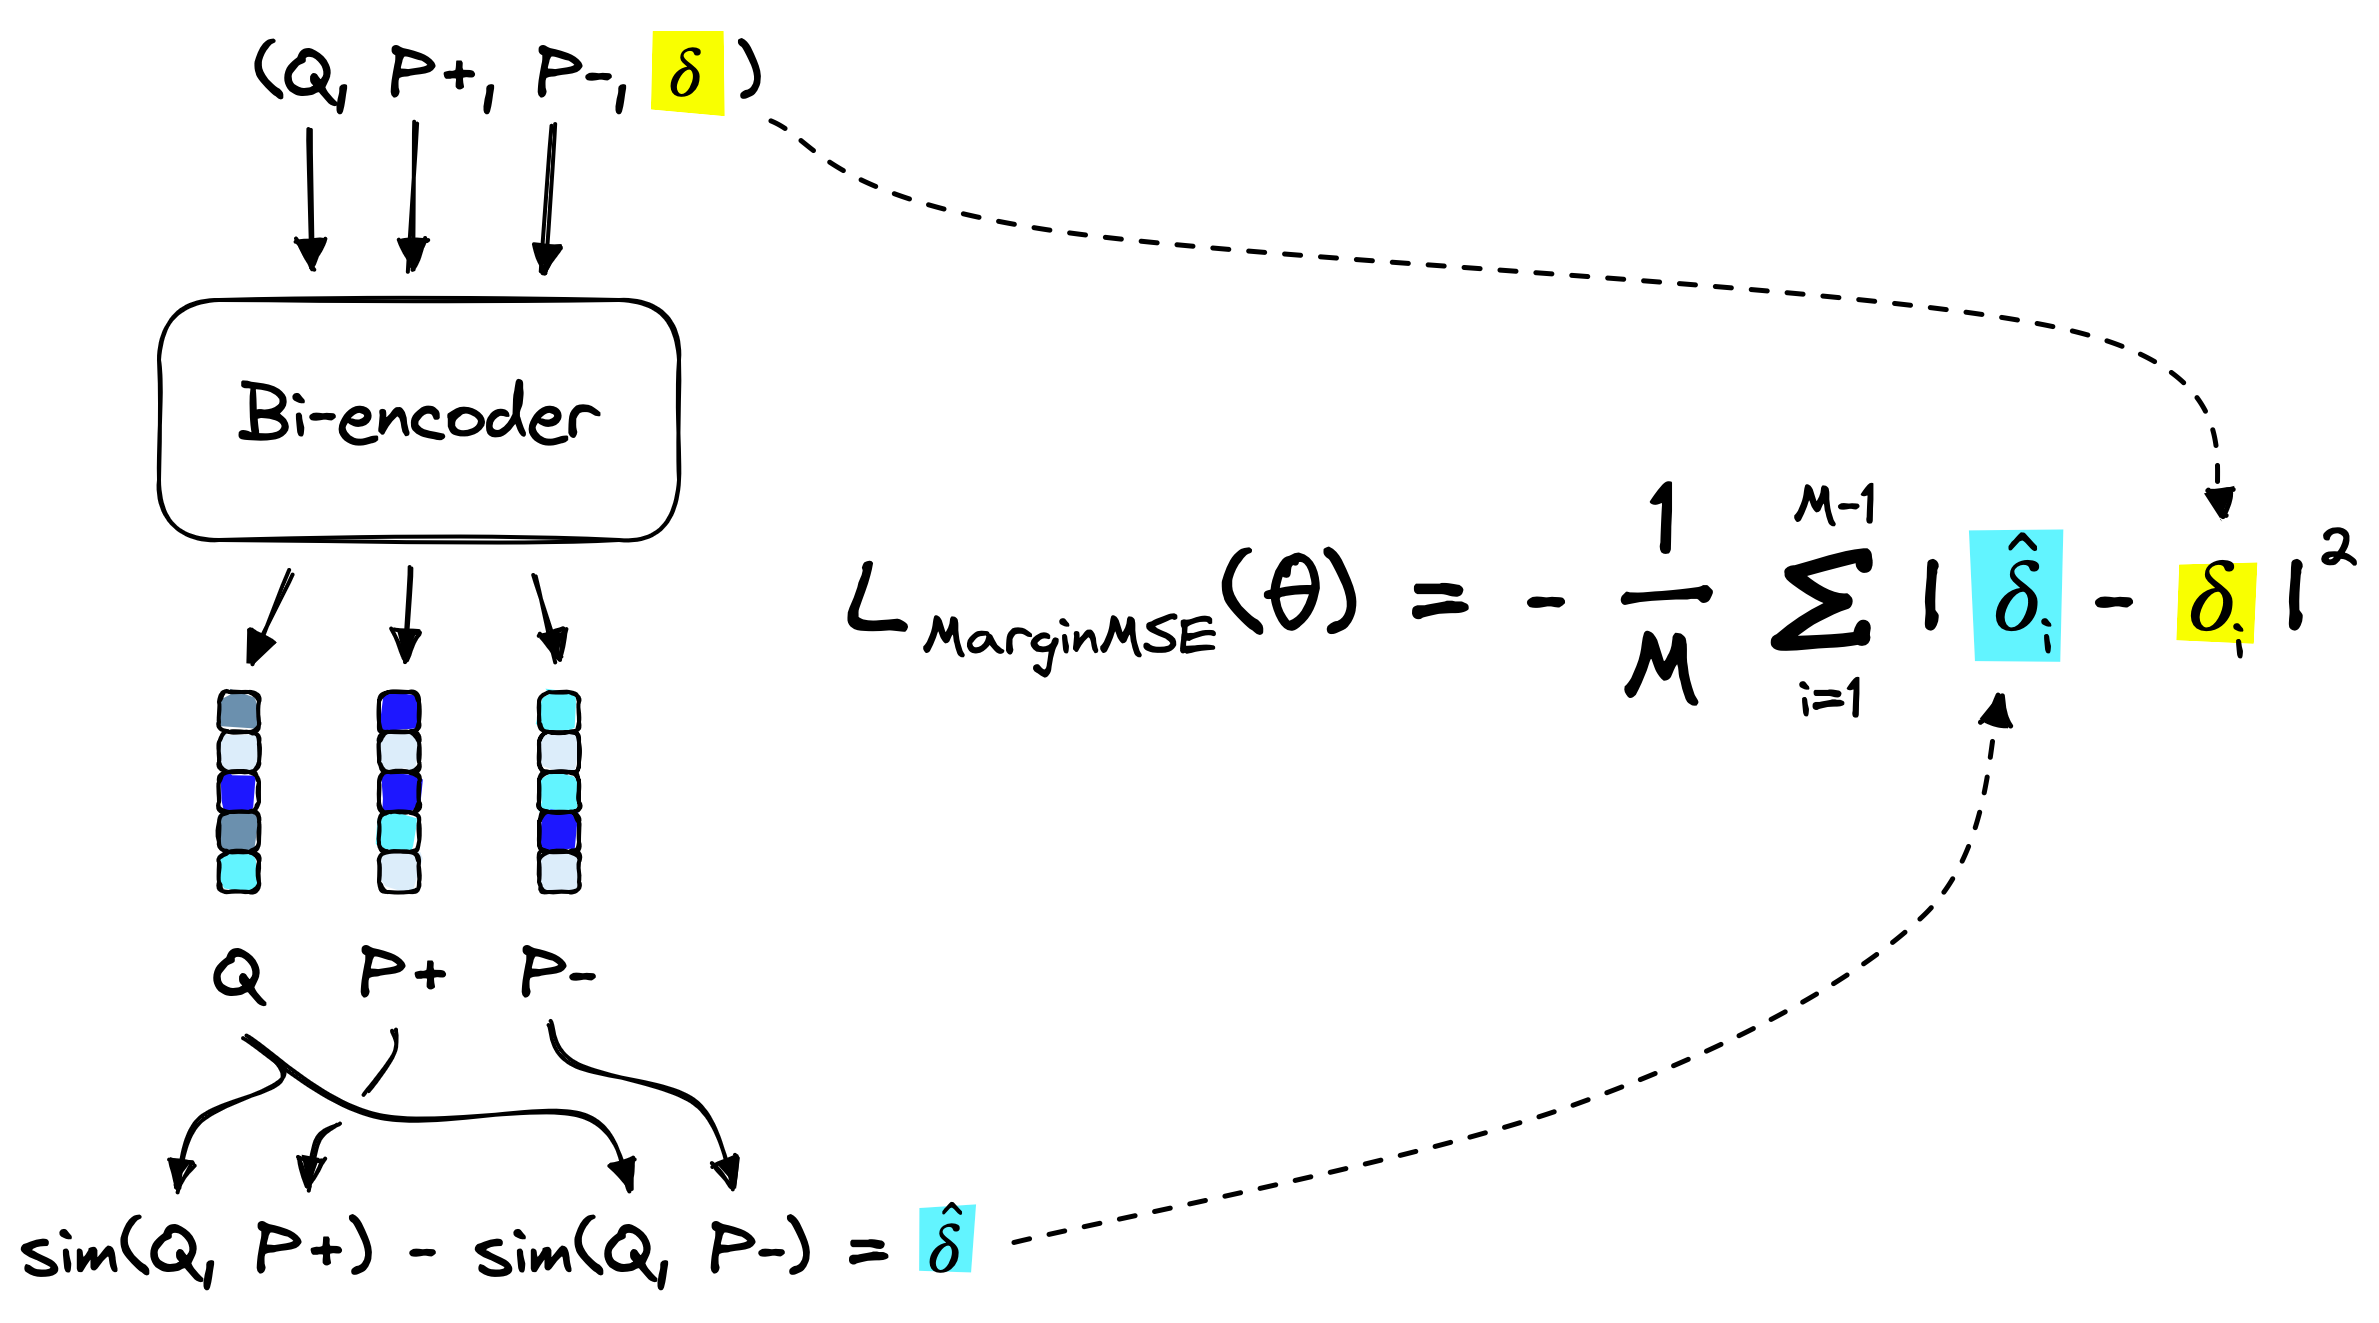 High-level view of (Q, P+, P-) triplets and how they fit into the margin MSE loss function.